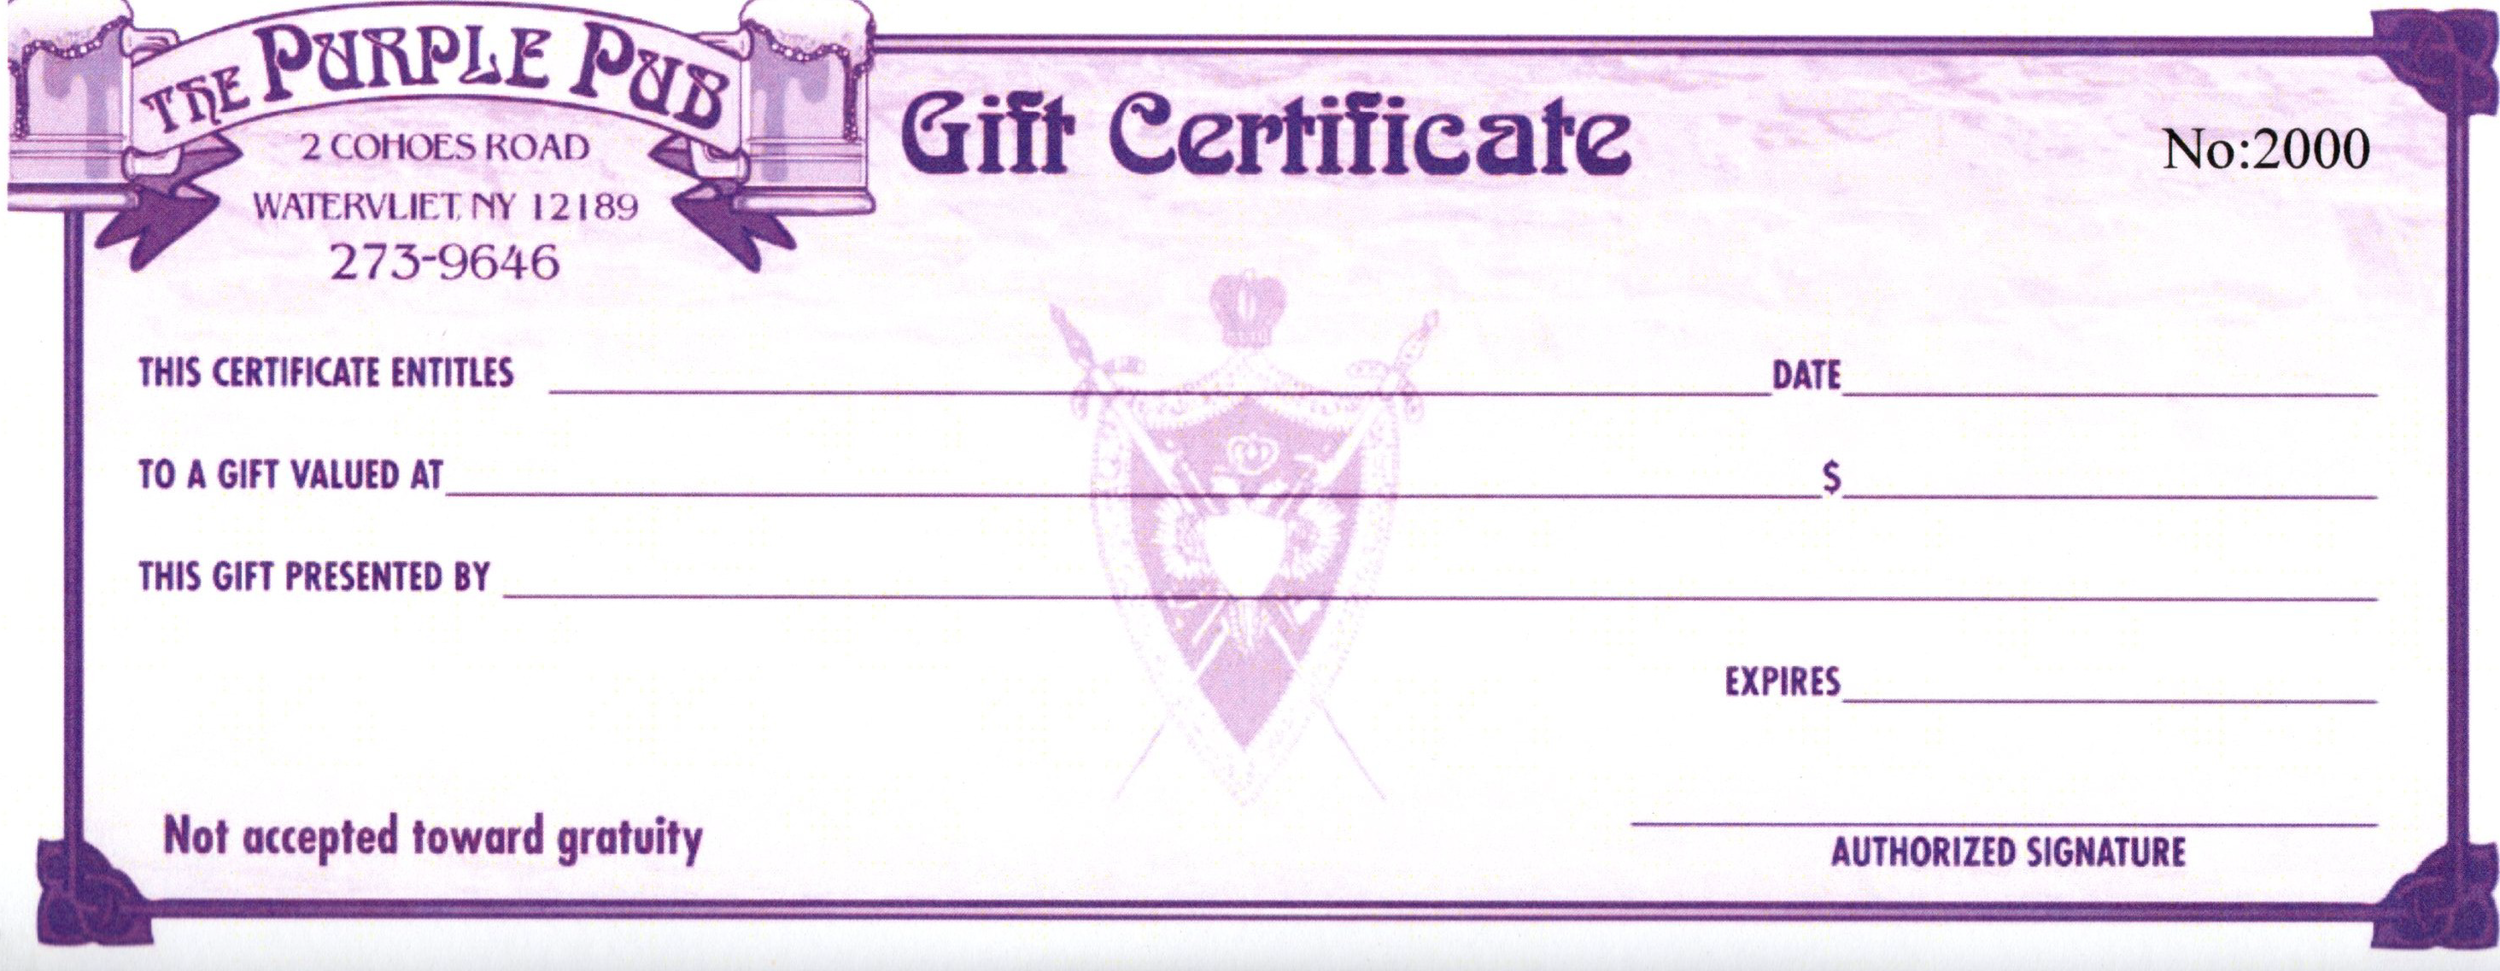 Gift Certificate - Physical or Instant Digital — Dock Street Brewery